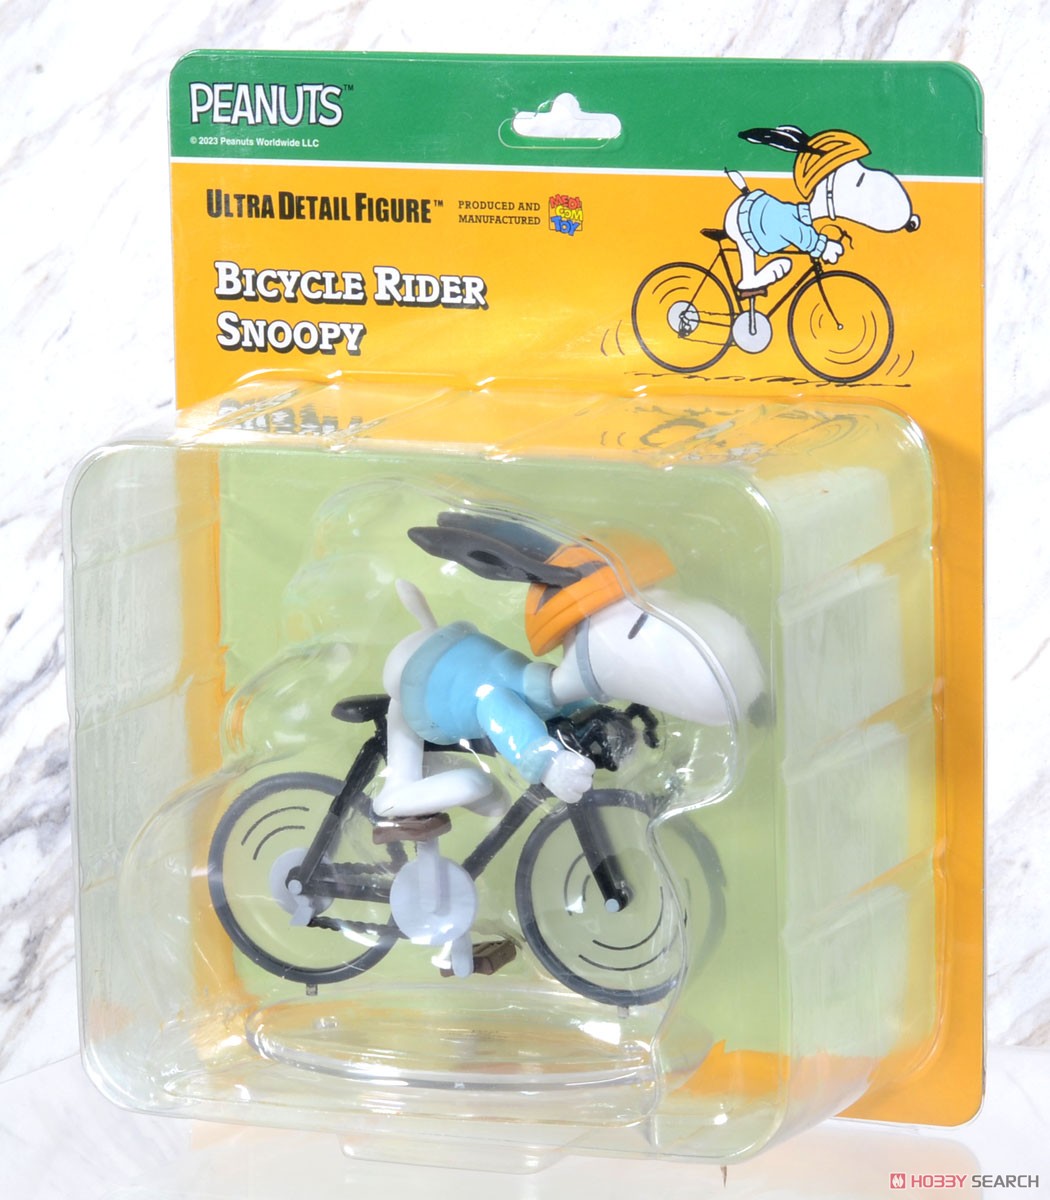 UDF No.691 Peanuts Series 14 Bicycle Rider Snoopy (Completed) Package1